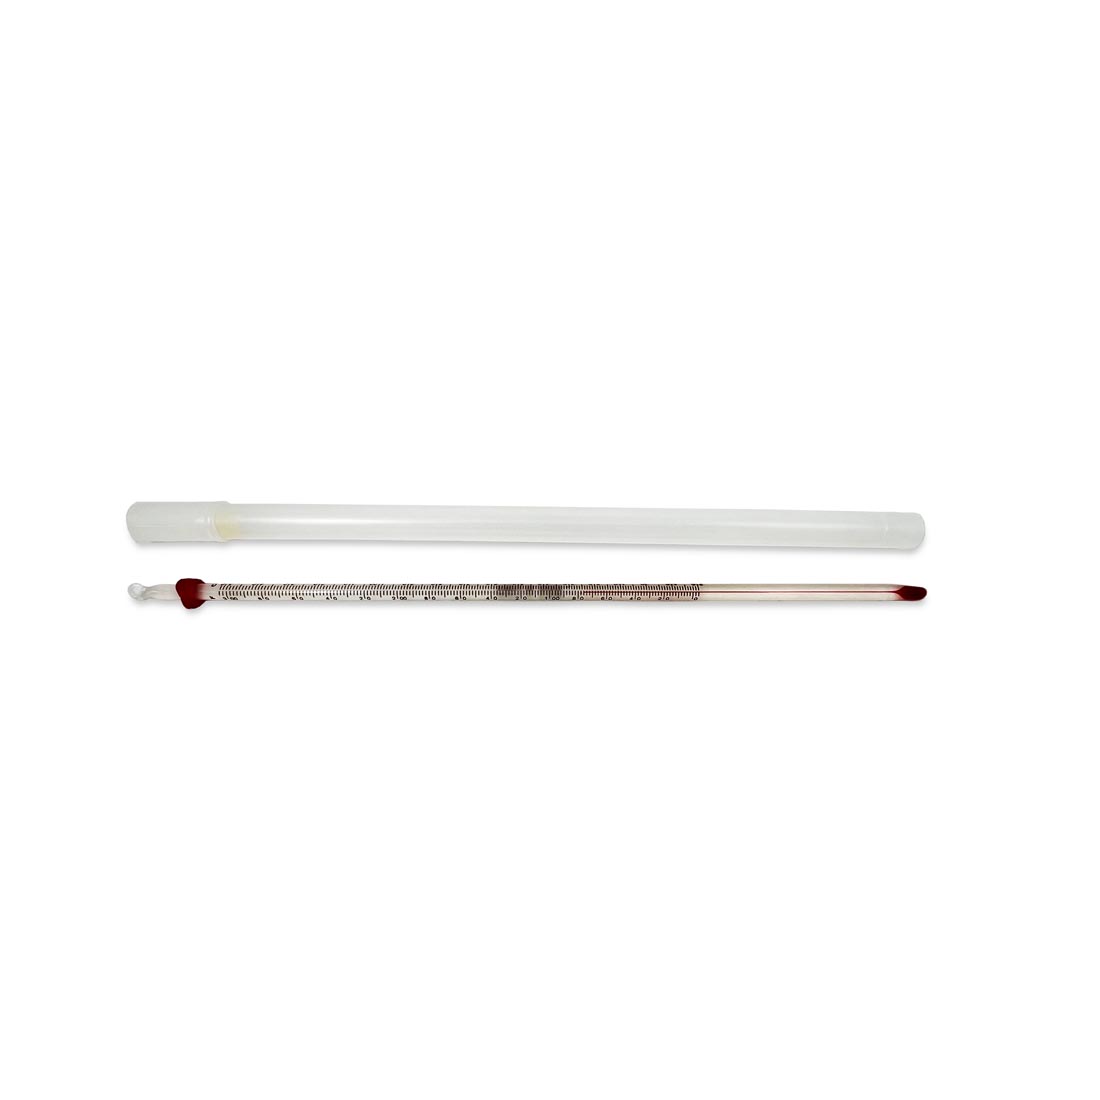 Lab Thermometer By Supertek Scientific, shown with plastic storage tube